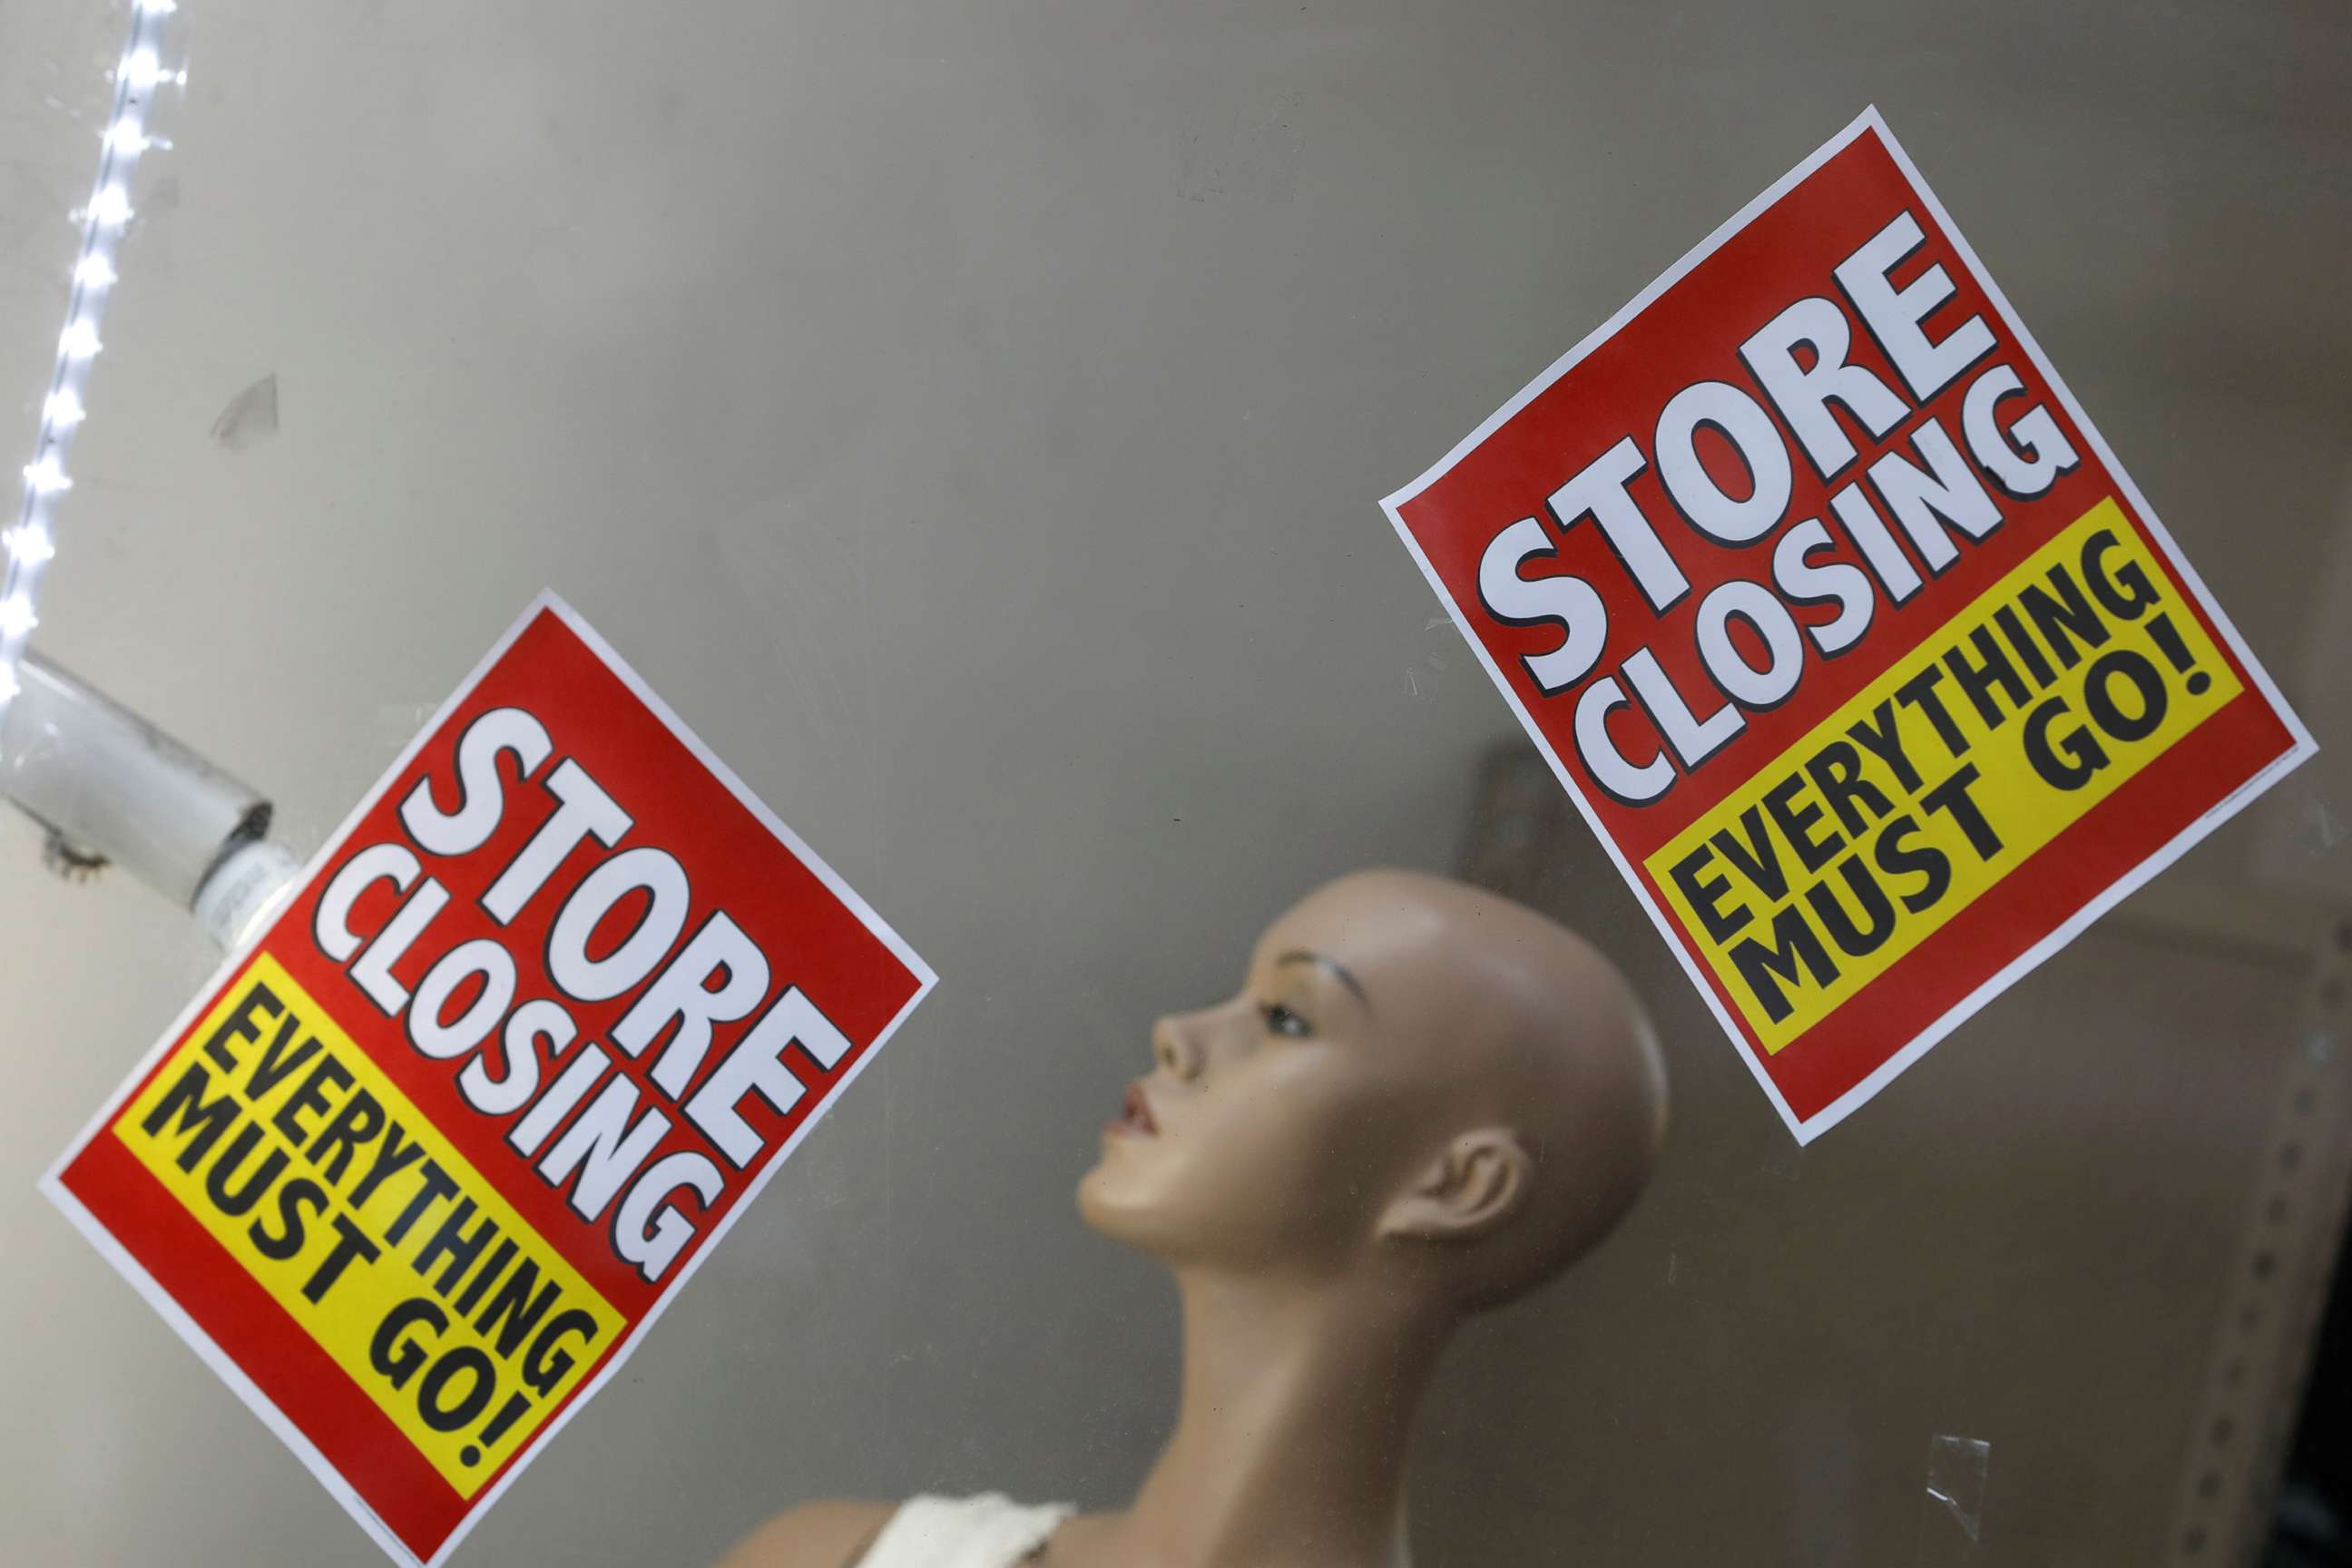 PHOTO: Signage is seen advertising a sale at a store that is closing in Manhattan, New York City, Aug. 17, 2020.